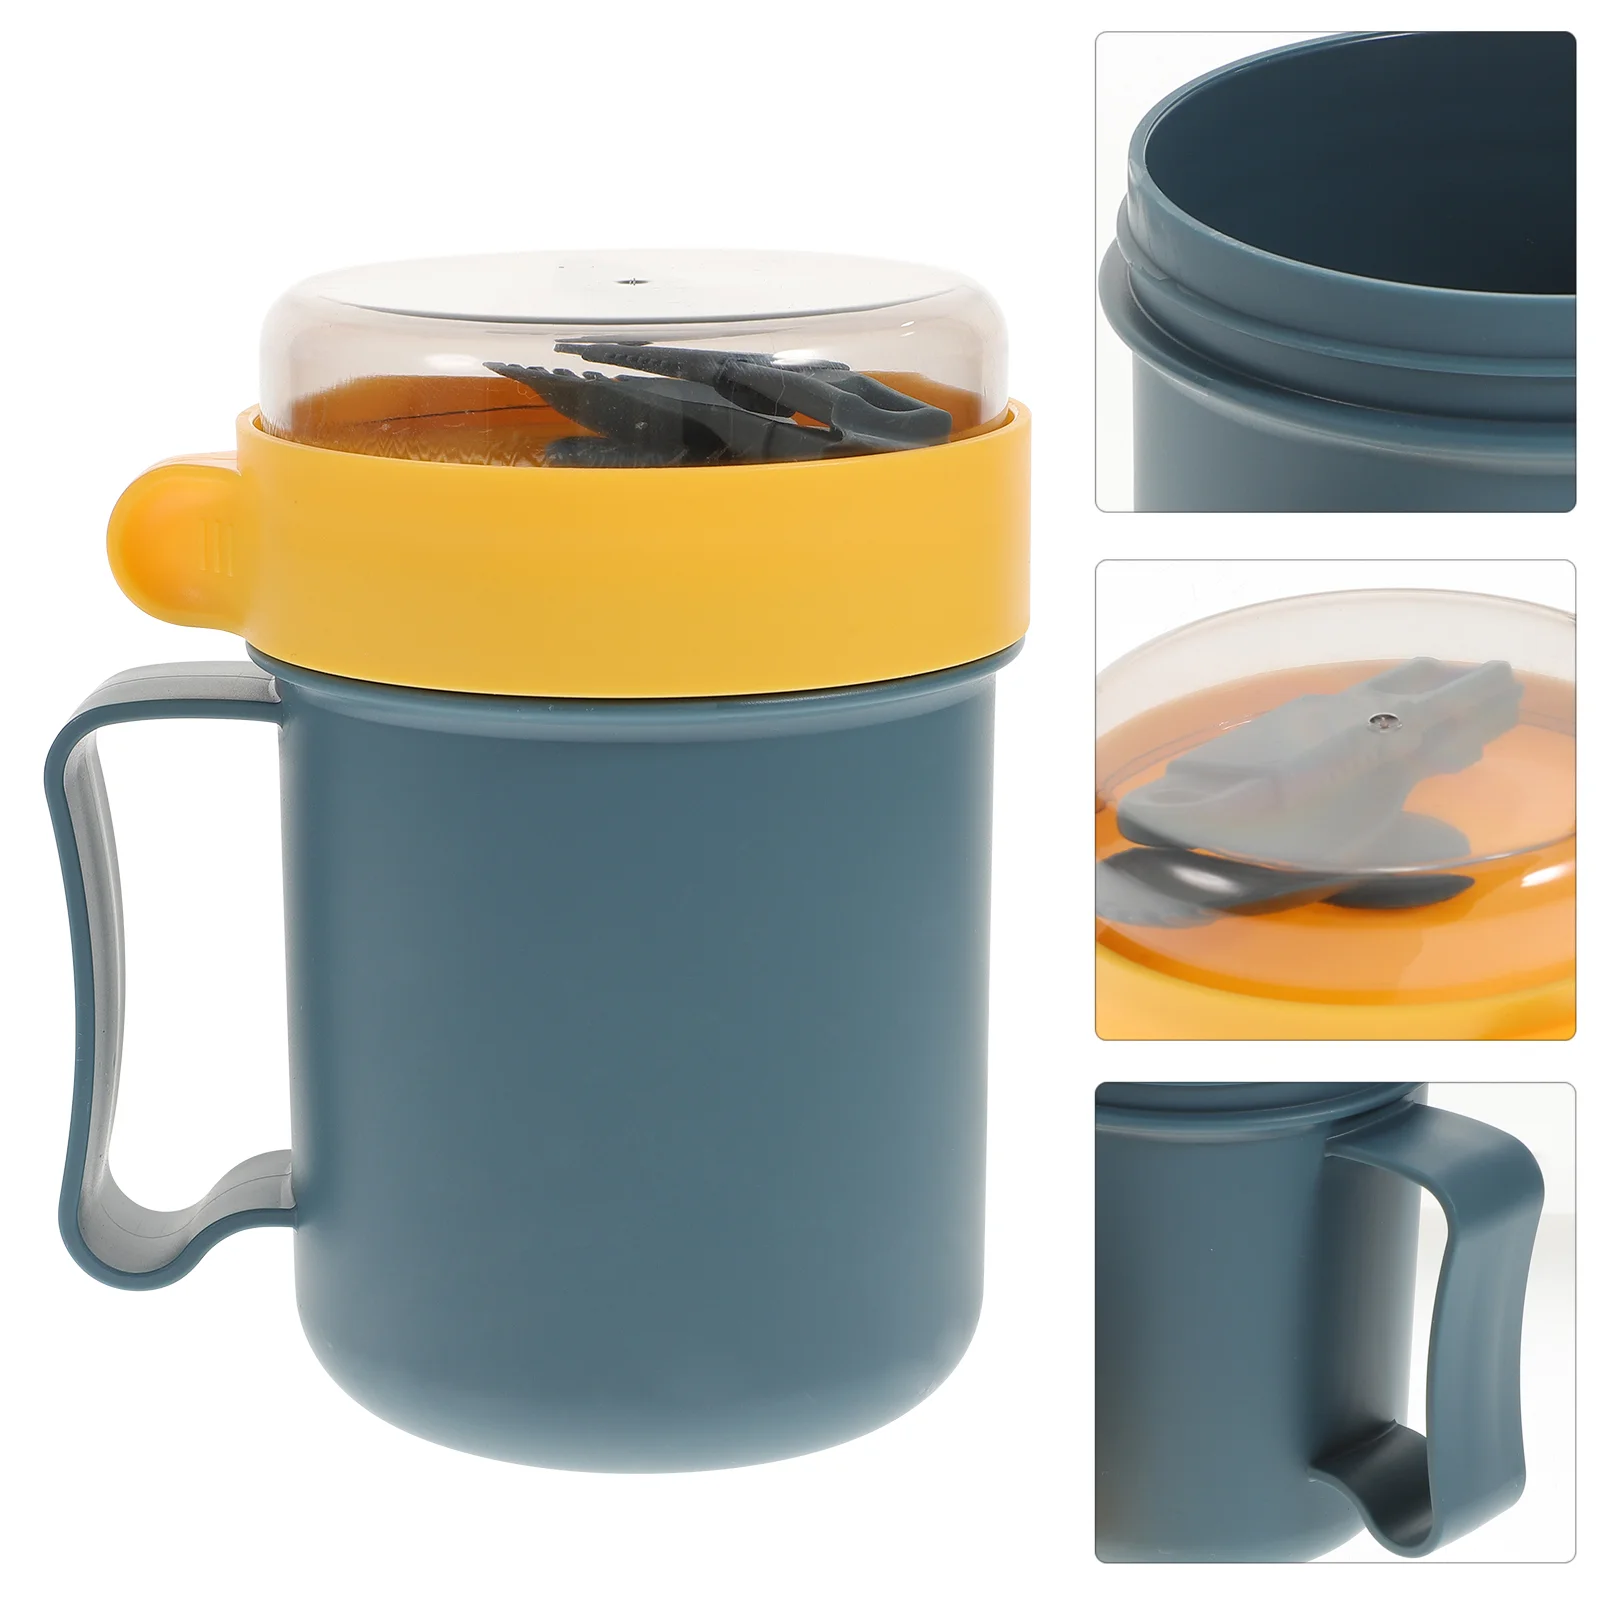 Cup Soup Withcereal Portable Go Mug Breakfast Lids Microwavethe Hotflask  Containersbowl Lid Coffee Jar Travel Cups Lunch Bowls